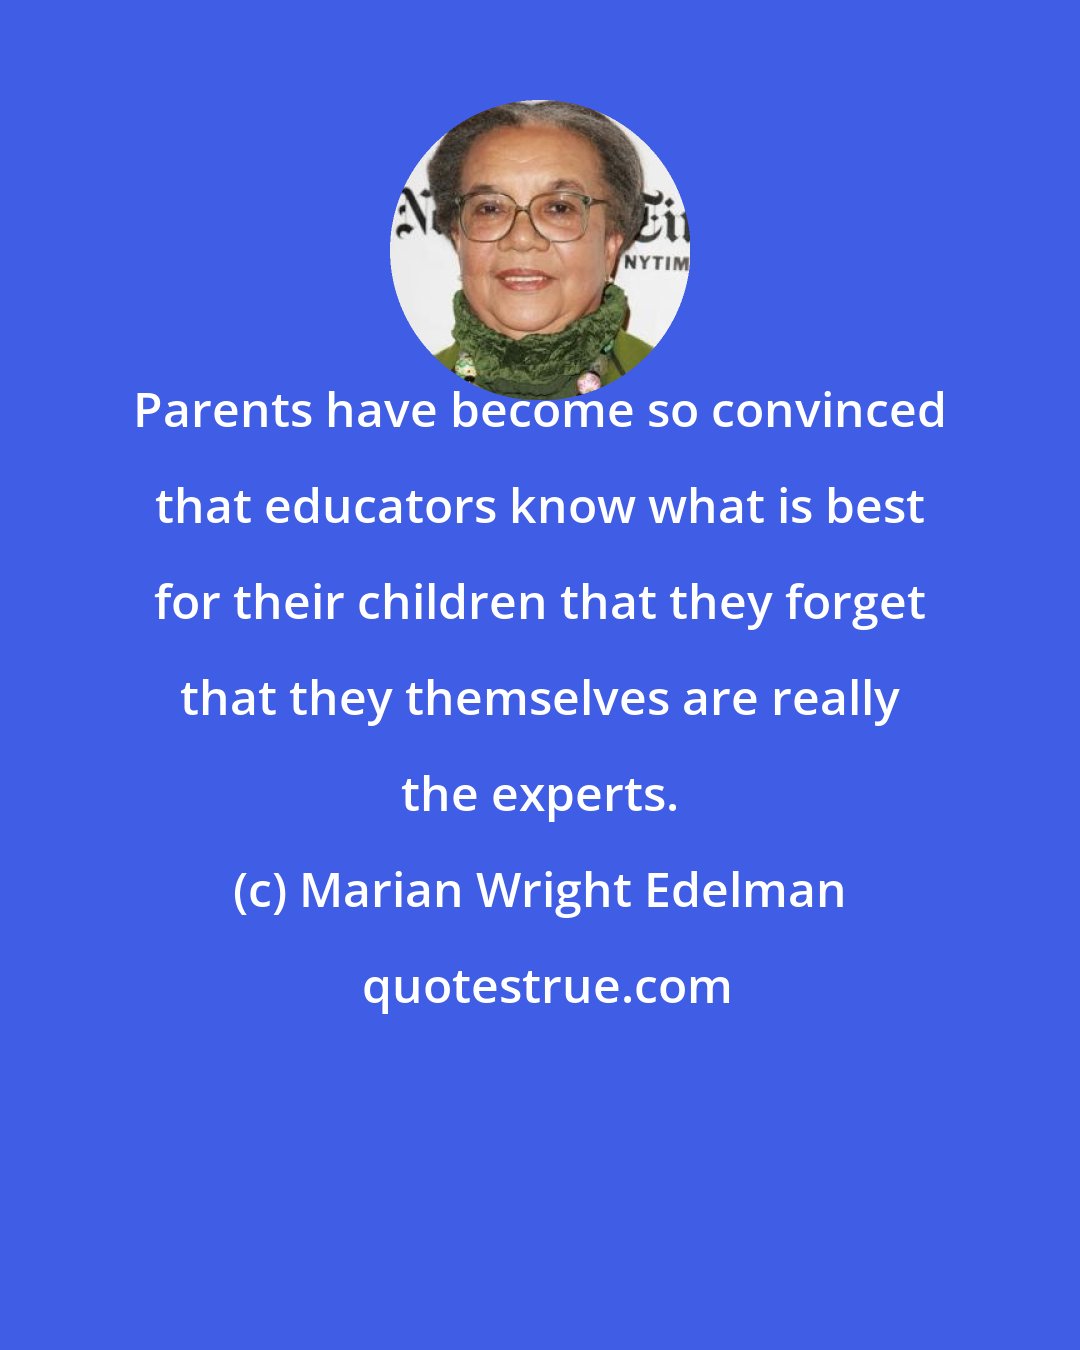 Marian Wright Edelman: Parents have become so convinced that educators know what is best for their children that they forget that they themselves are really the experts.